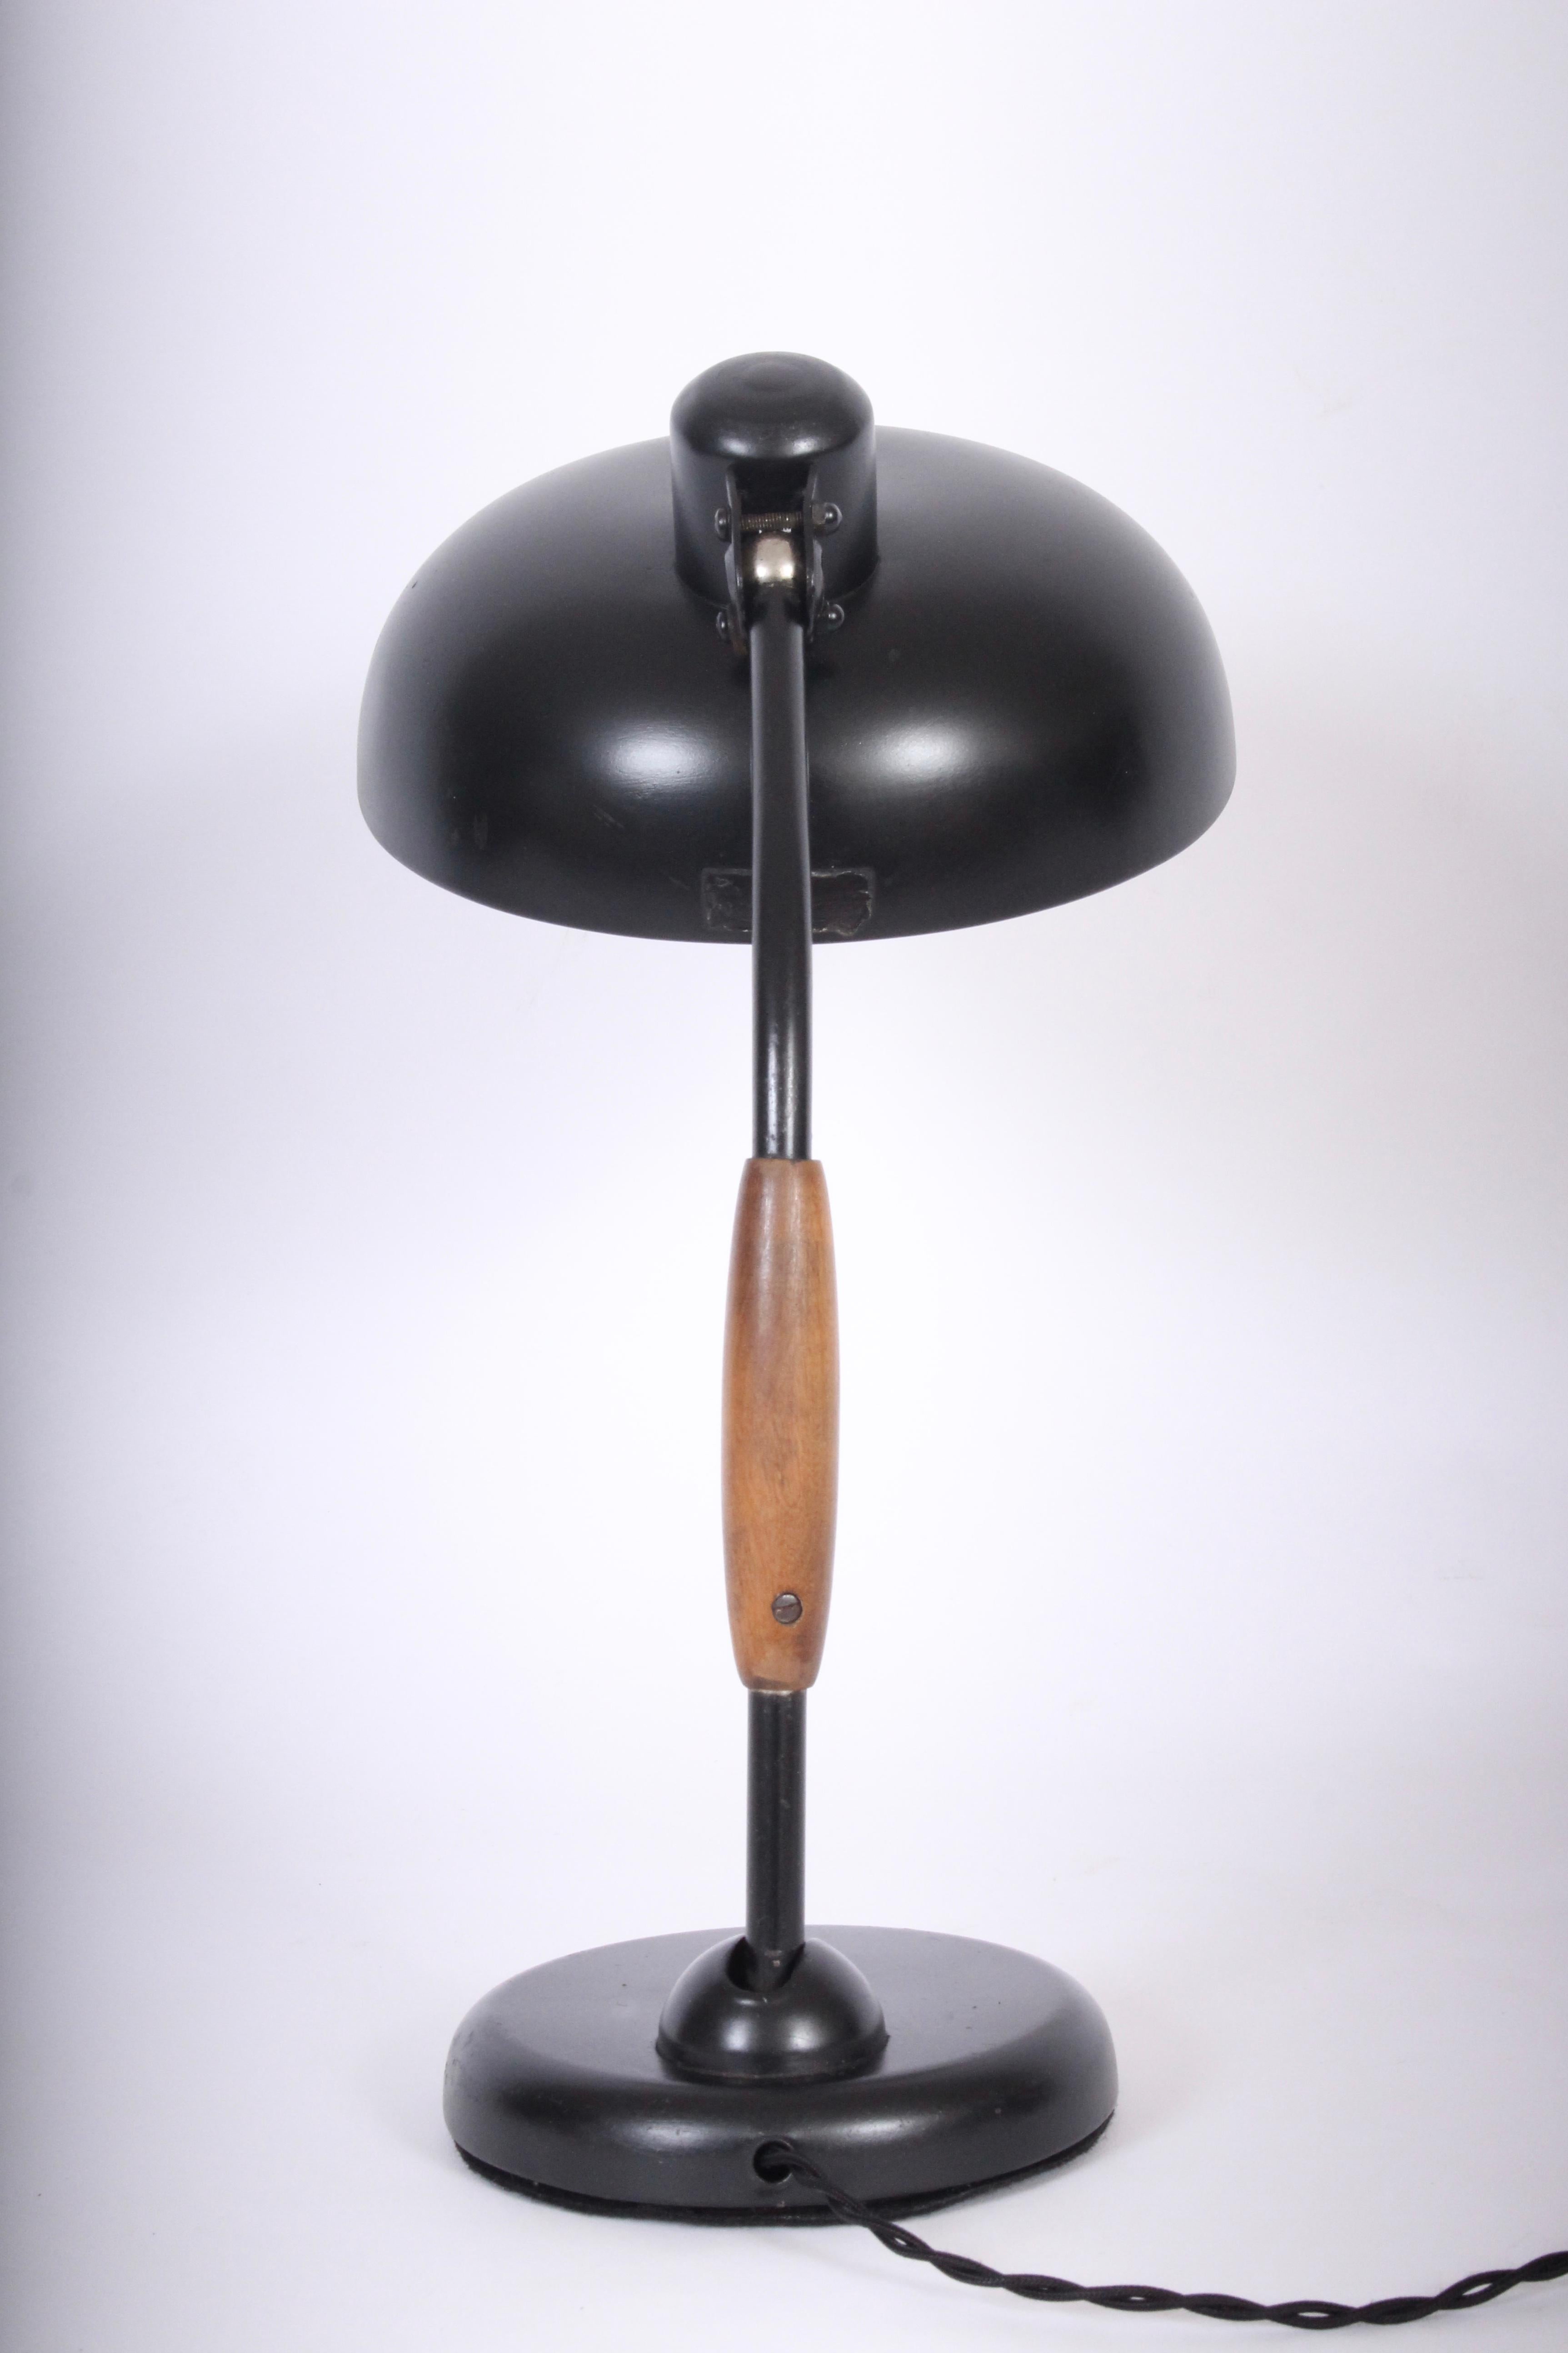 Black wood handled table lamp detail designed by Christian Dell in 1933. Produced by Koranda, Vienna. Featuring a tilt black metal stem, wood handle, adjustable and wide 9D black metal saucer shade on sturdy round 6D metal base. Base switch.